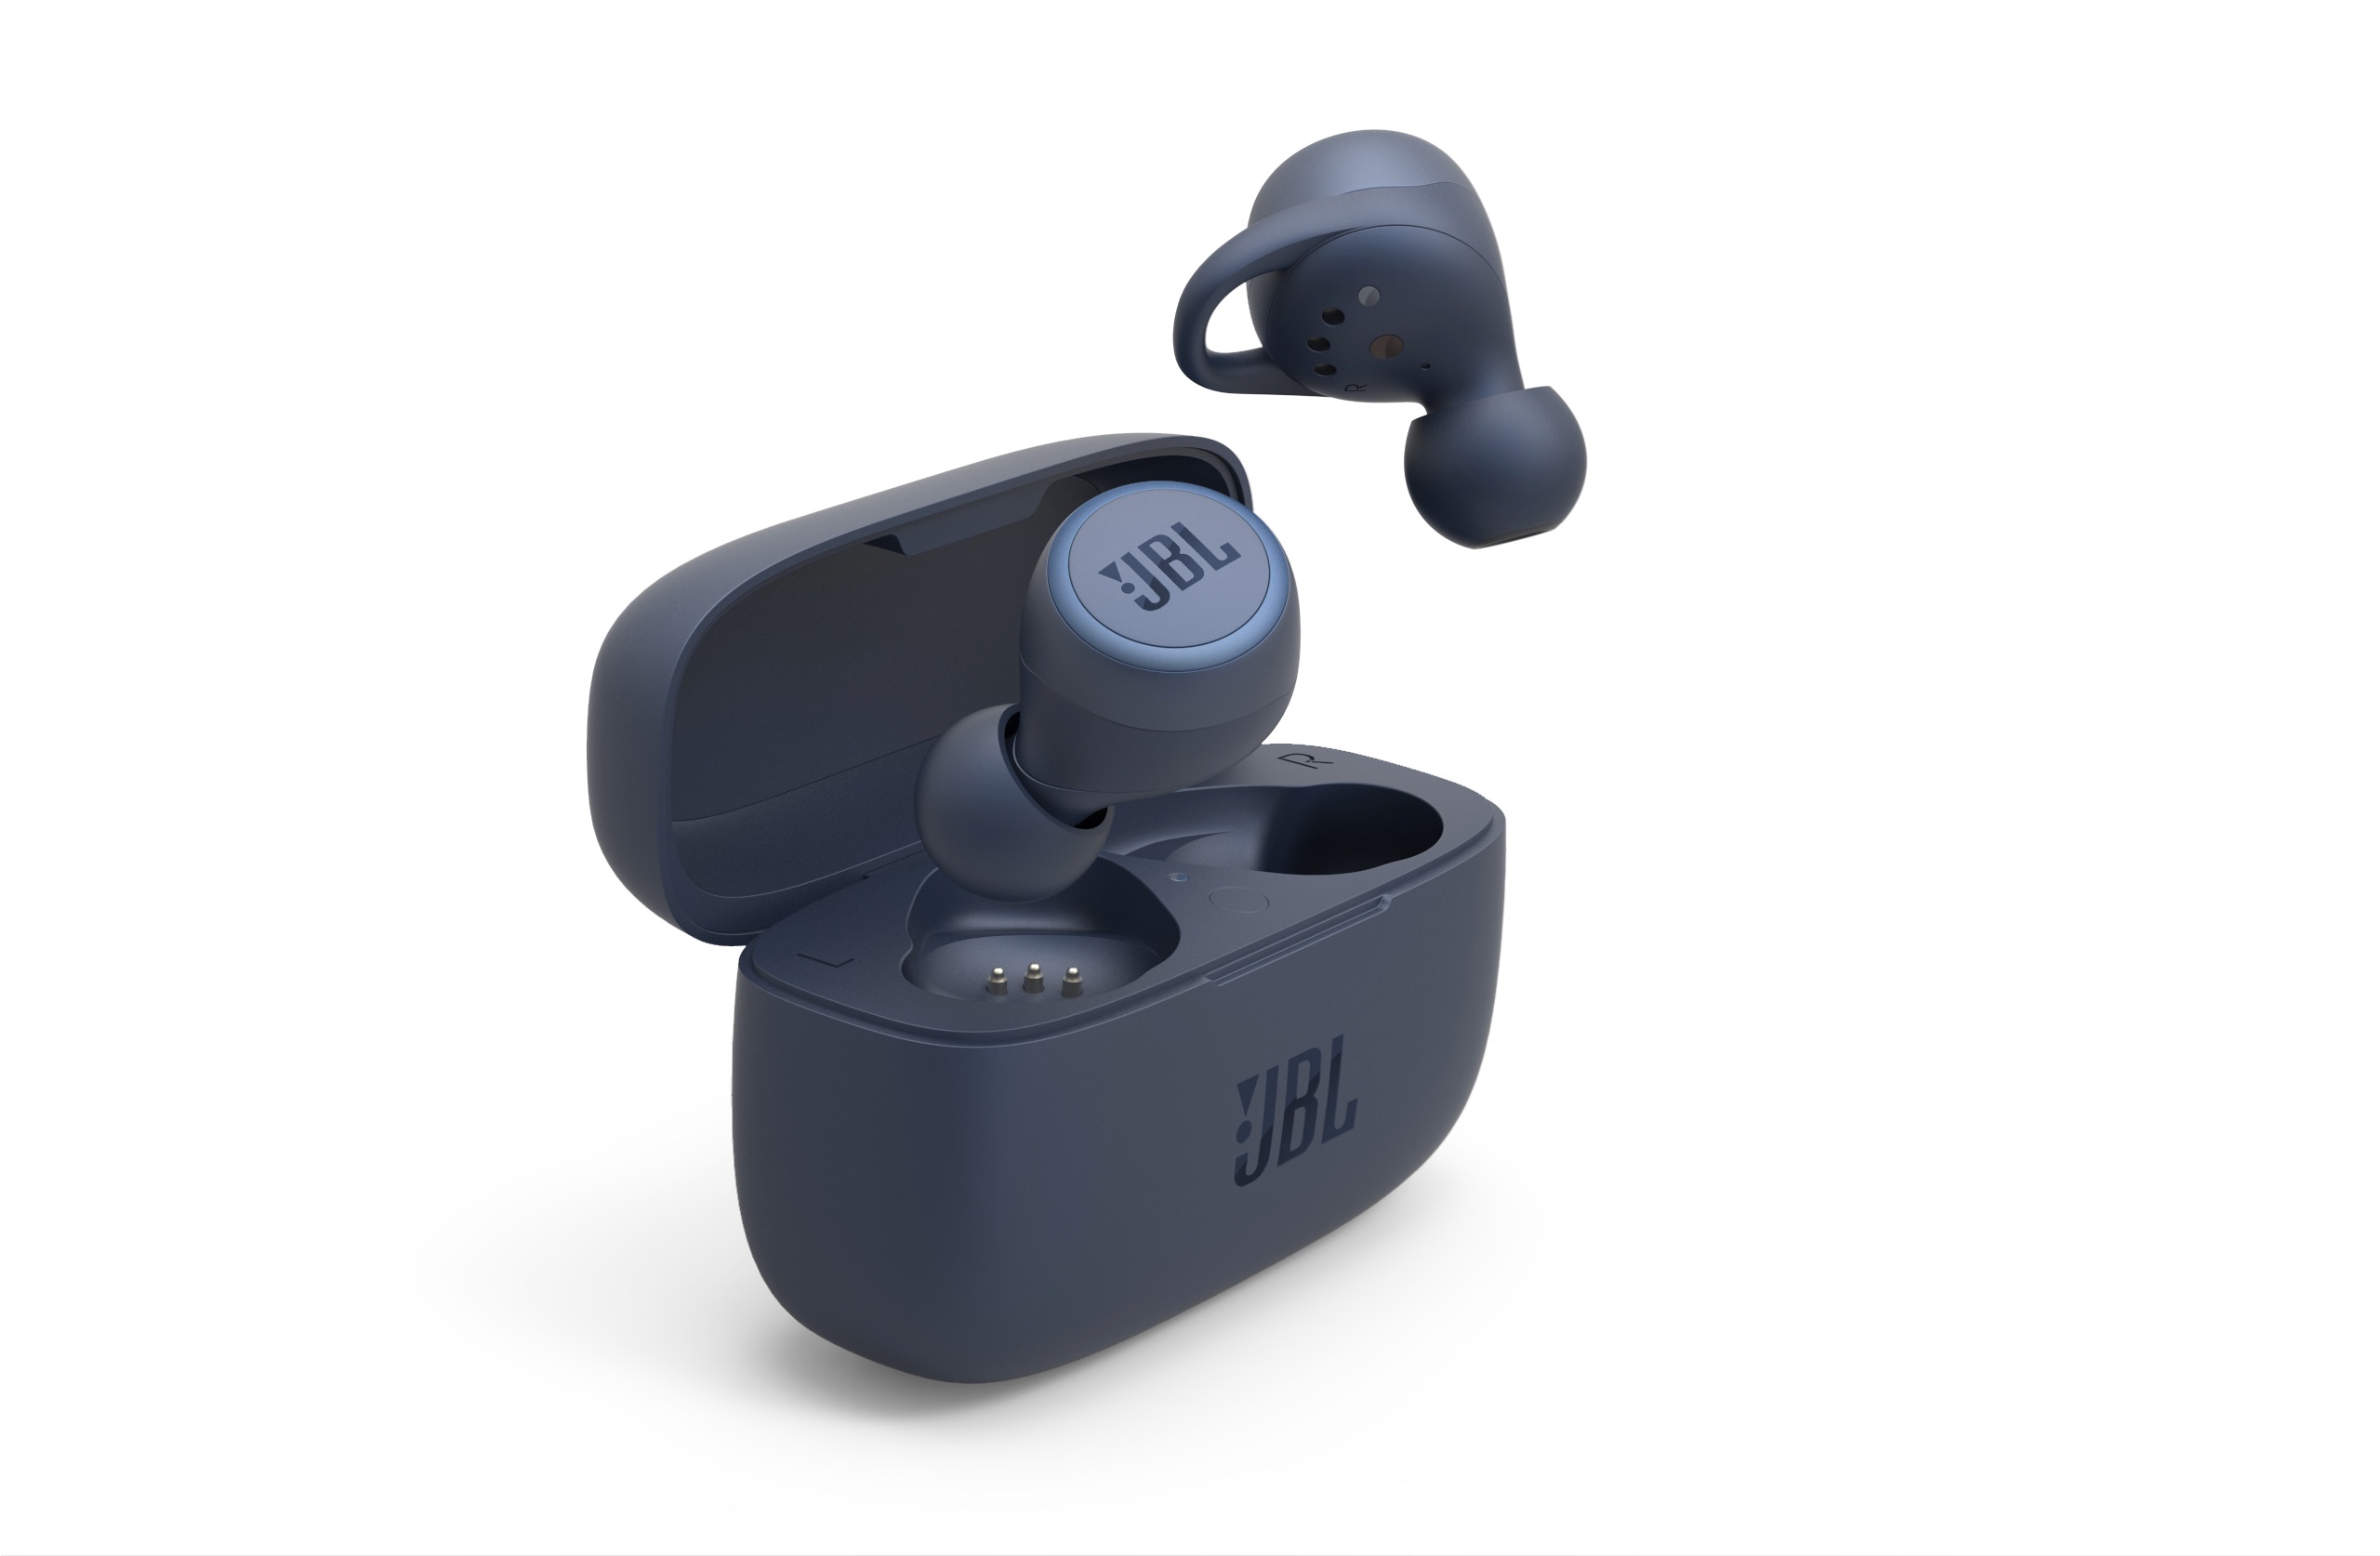 jbl pulse 4 live 300 tws ifa 2019 328885 300tws product render blue with charging case 70c276 original 1567502333